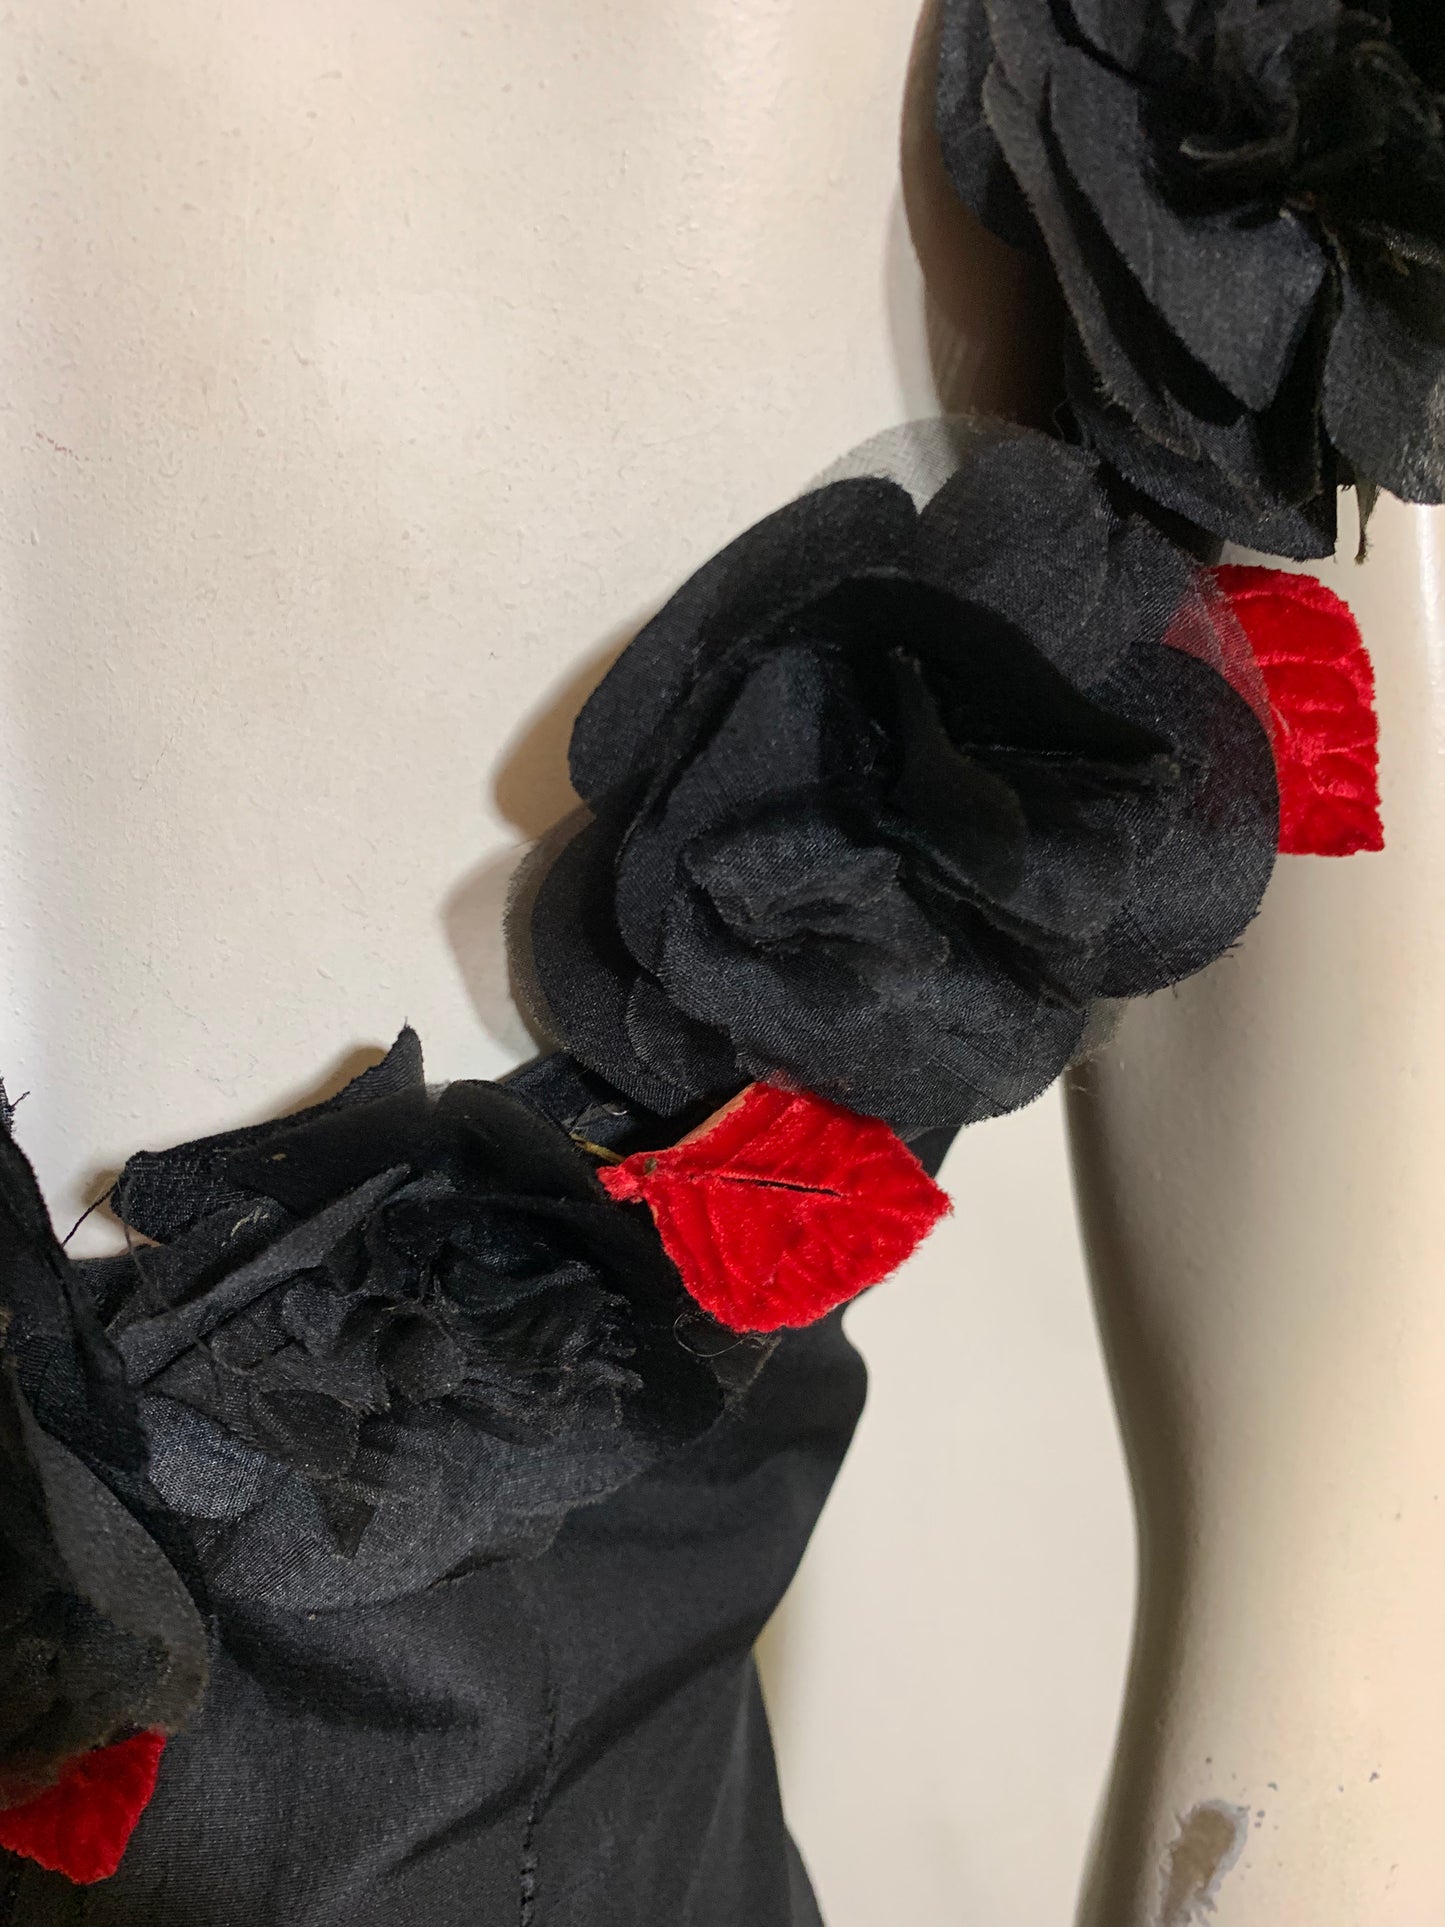 Show Stopping Figure Conscious Sleeveless Black Cocktail Dress with Daring Low Back Trimmed in Black and Red Roses circa 1950s